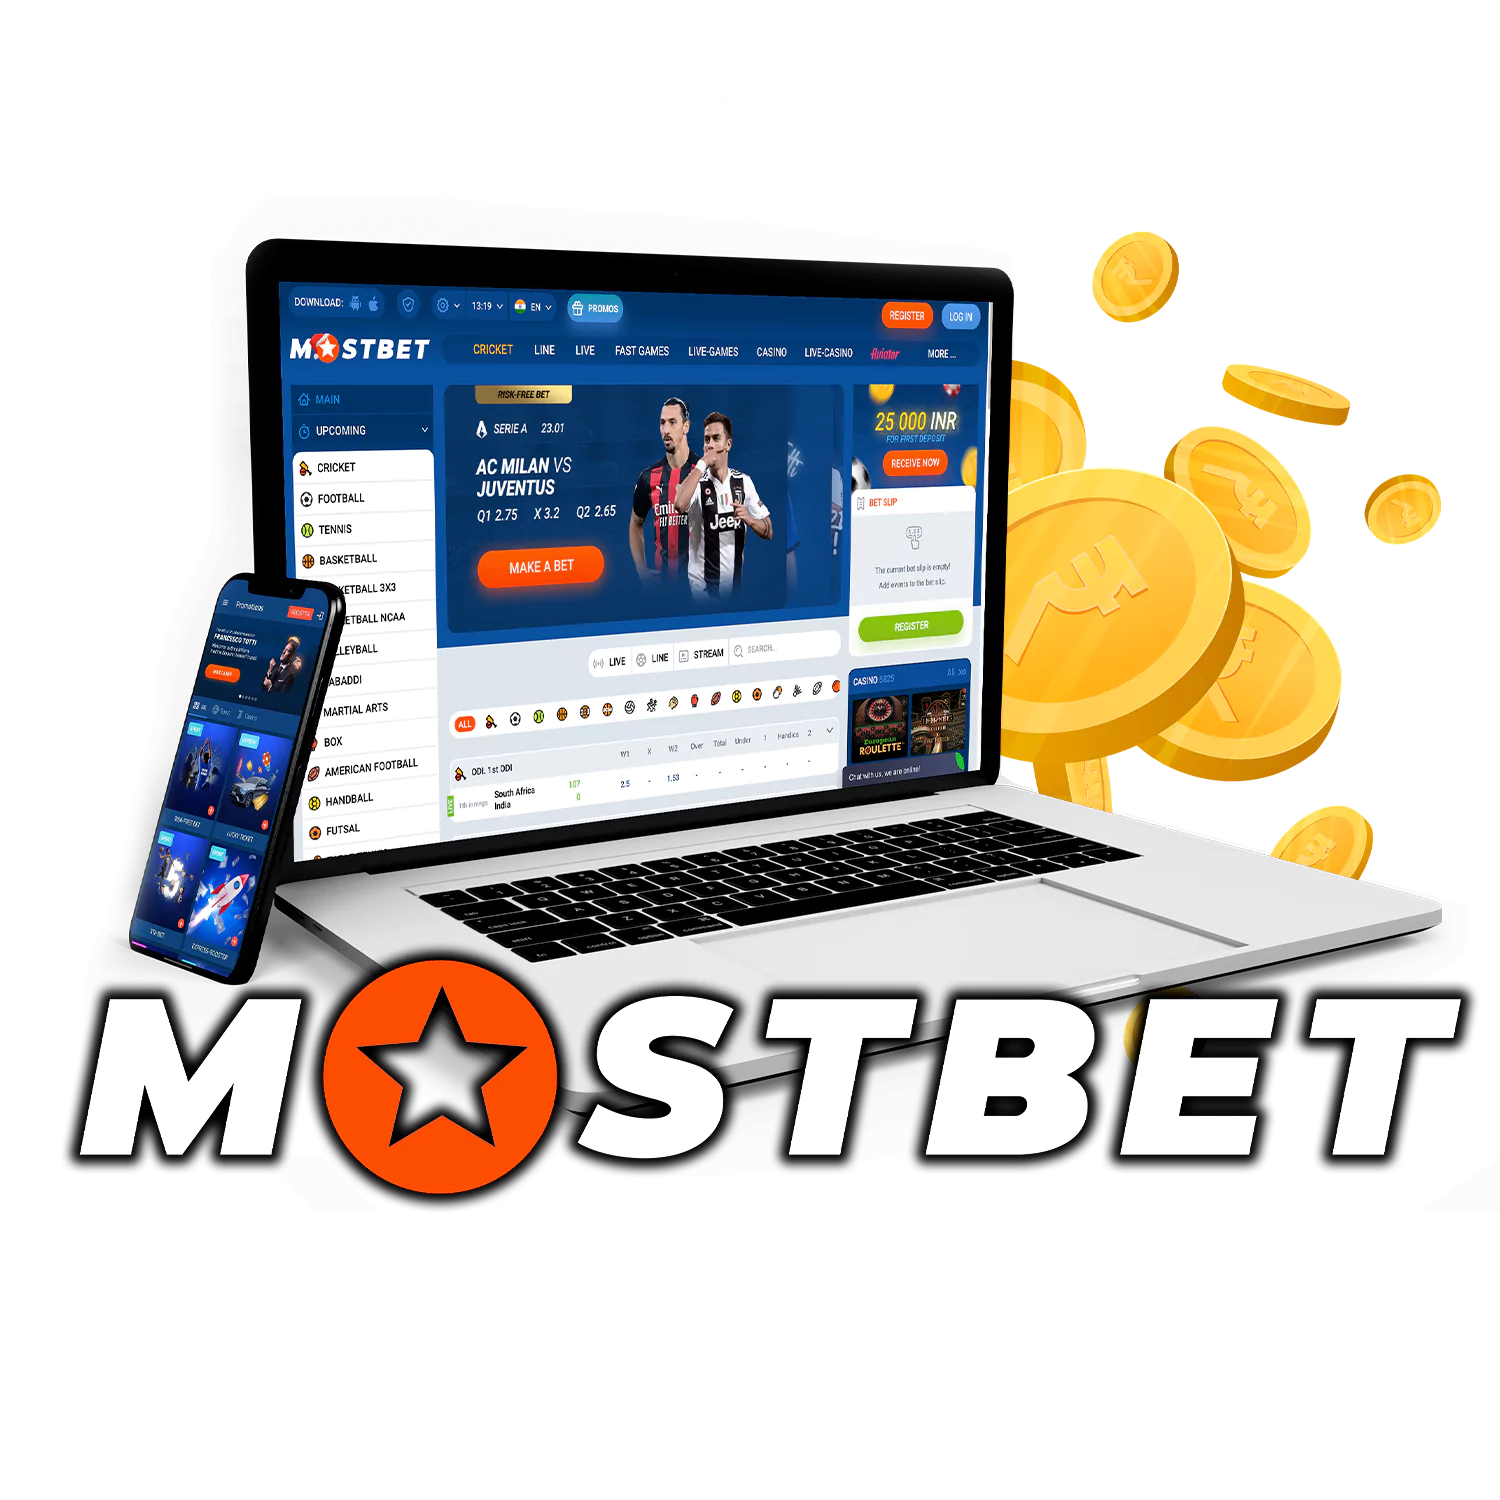 5 Brilliant Ways To Teach Your Audience About Mostbet Online Casino Games Company